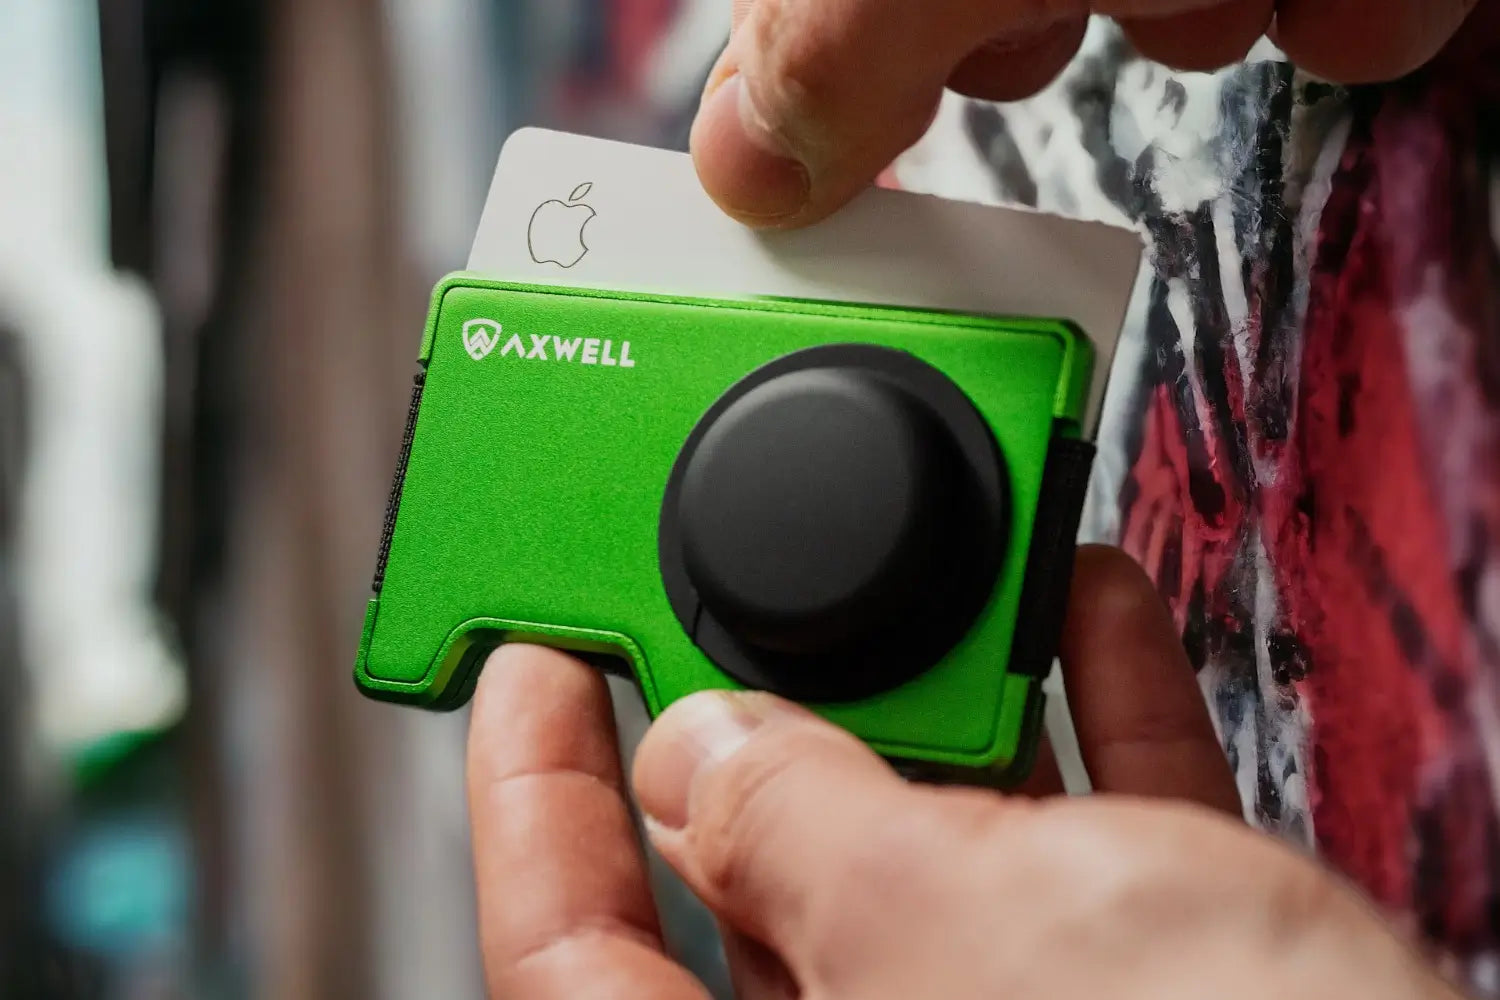 Axwell Wallet with Apple AirTag Tracker